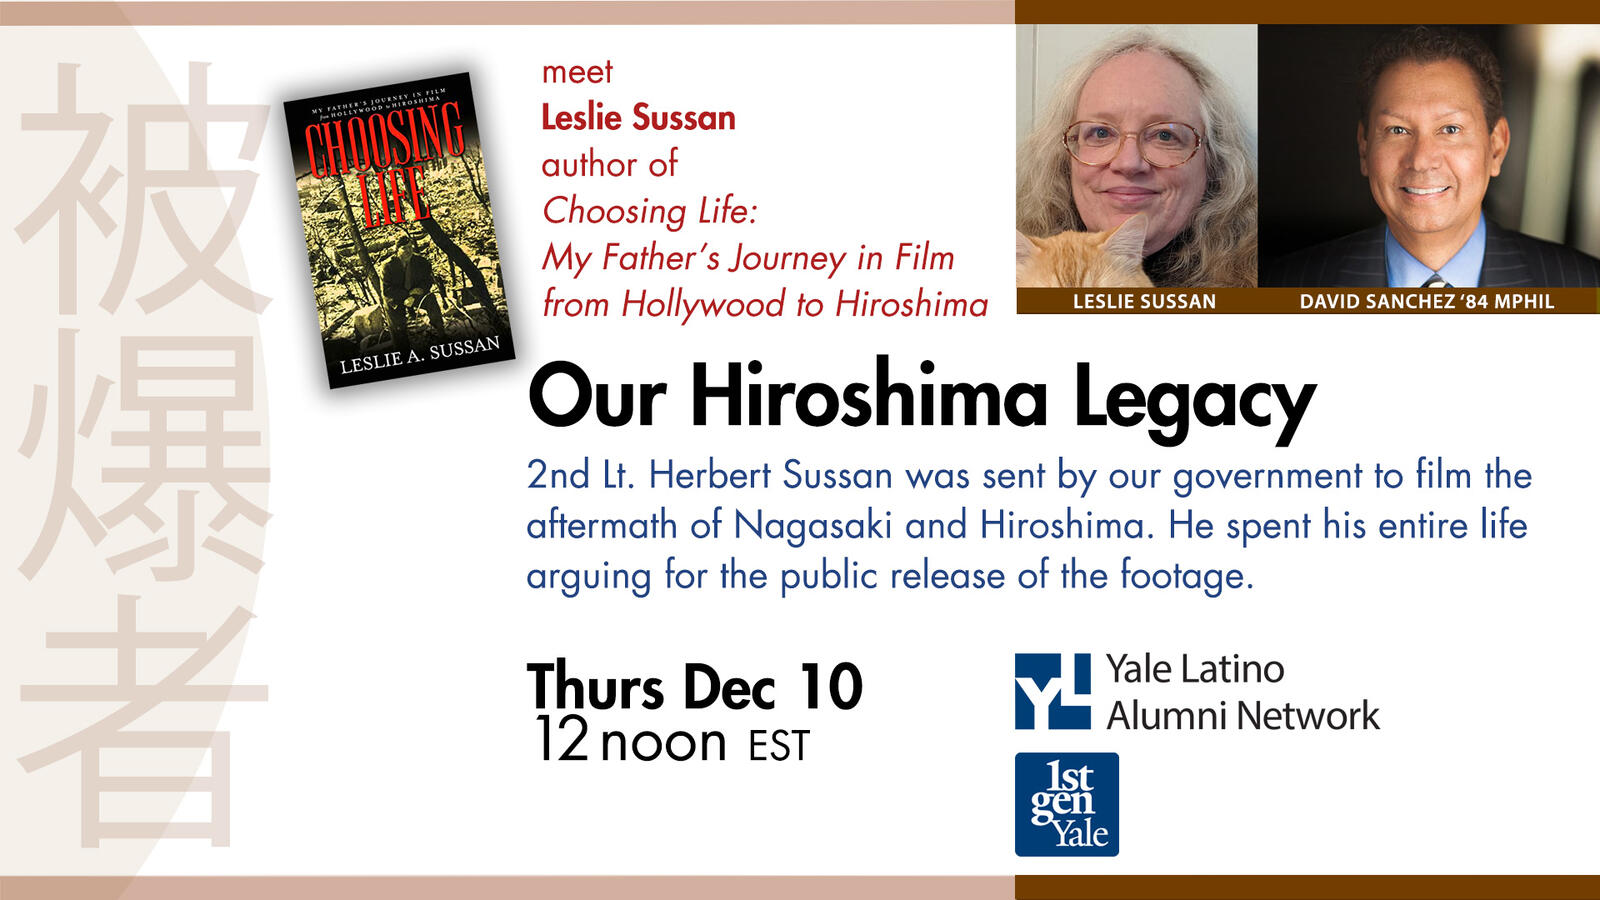 Our Hiroshima Legacy: A Conversation with the Yale Latino Alumni Network and Author Leslie Sussan